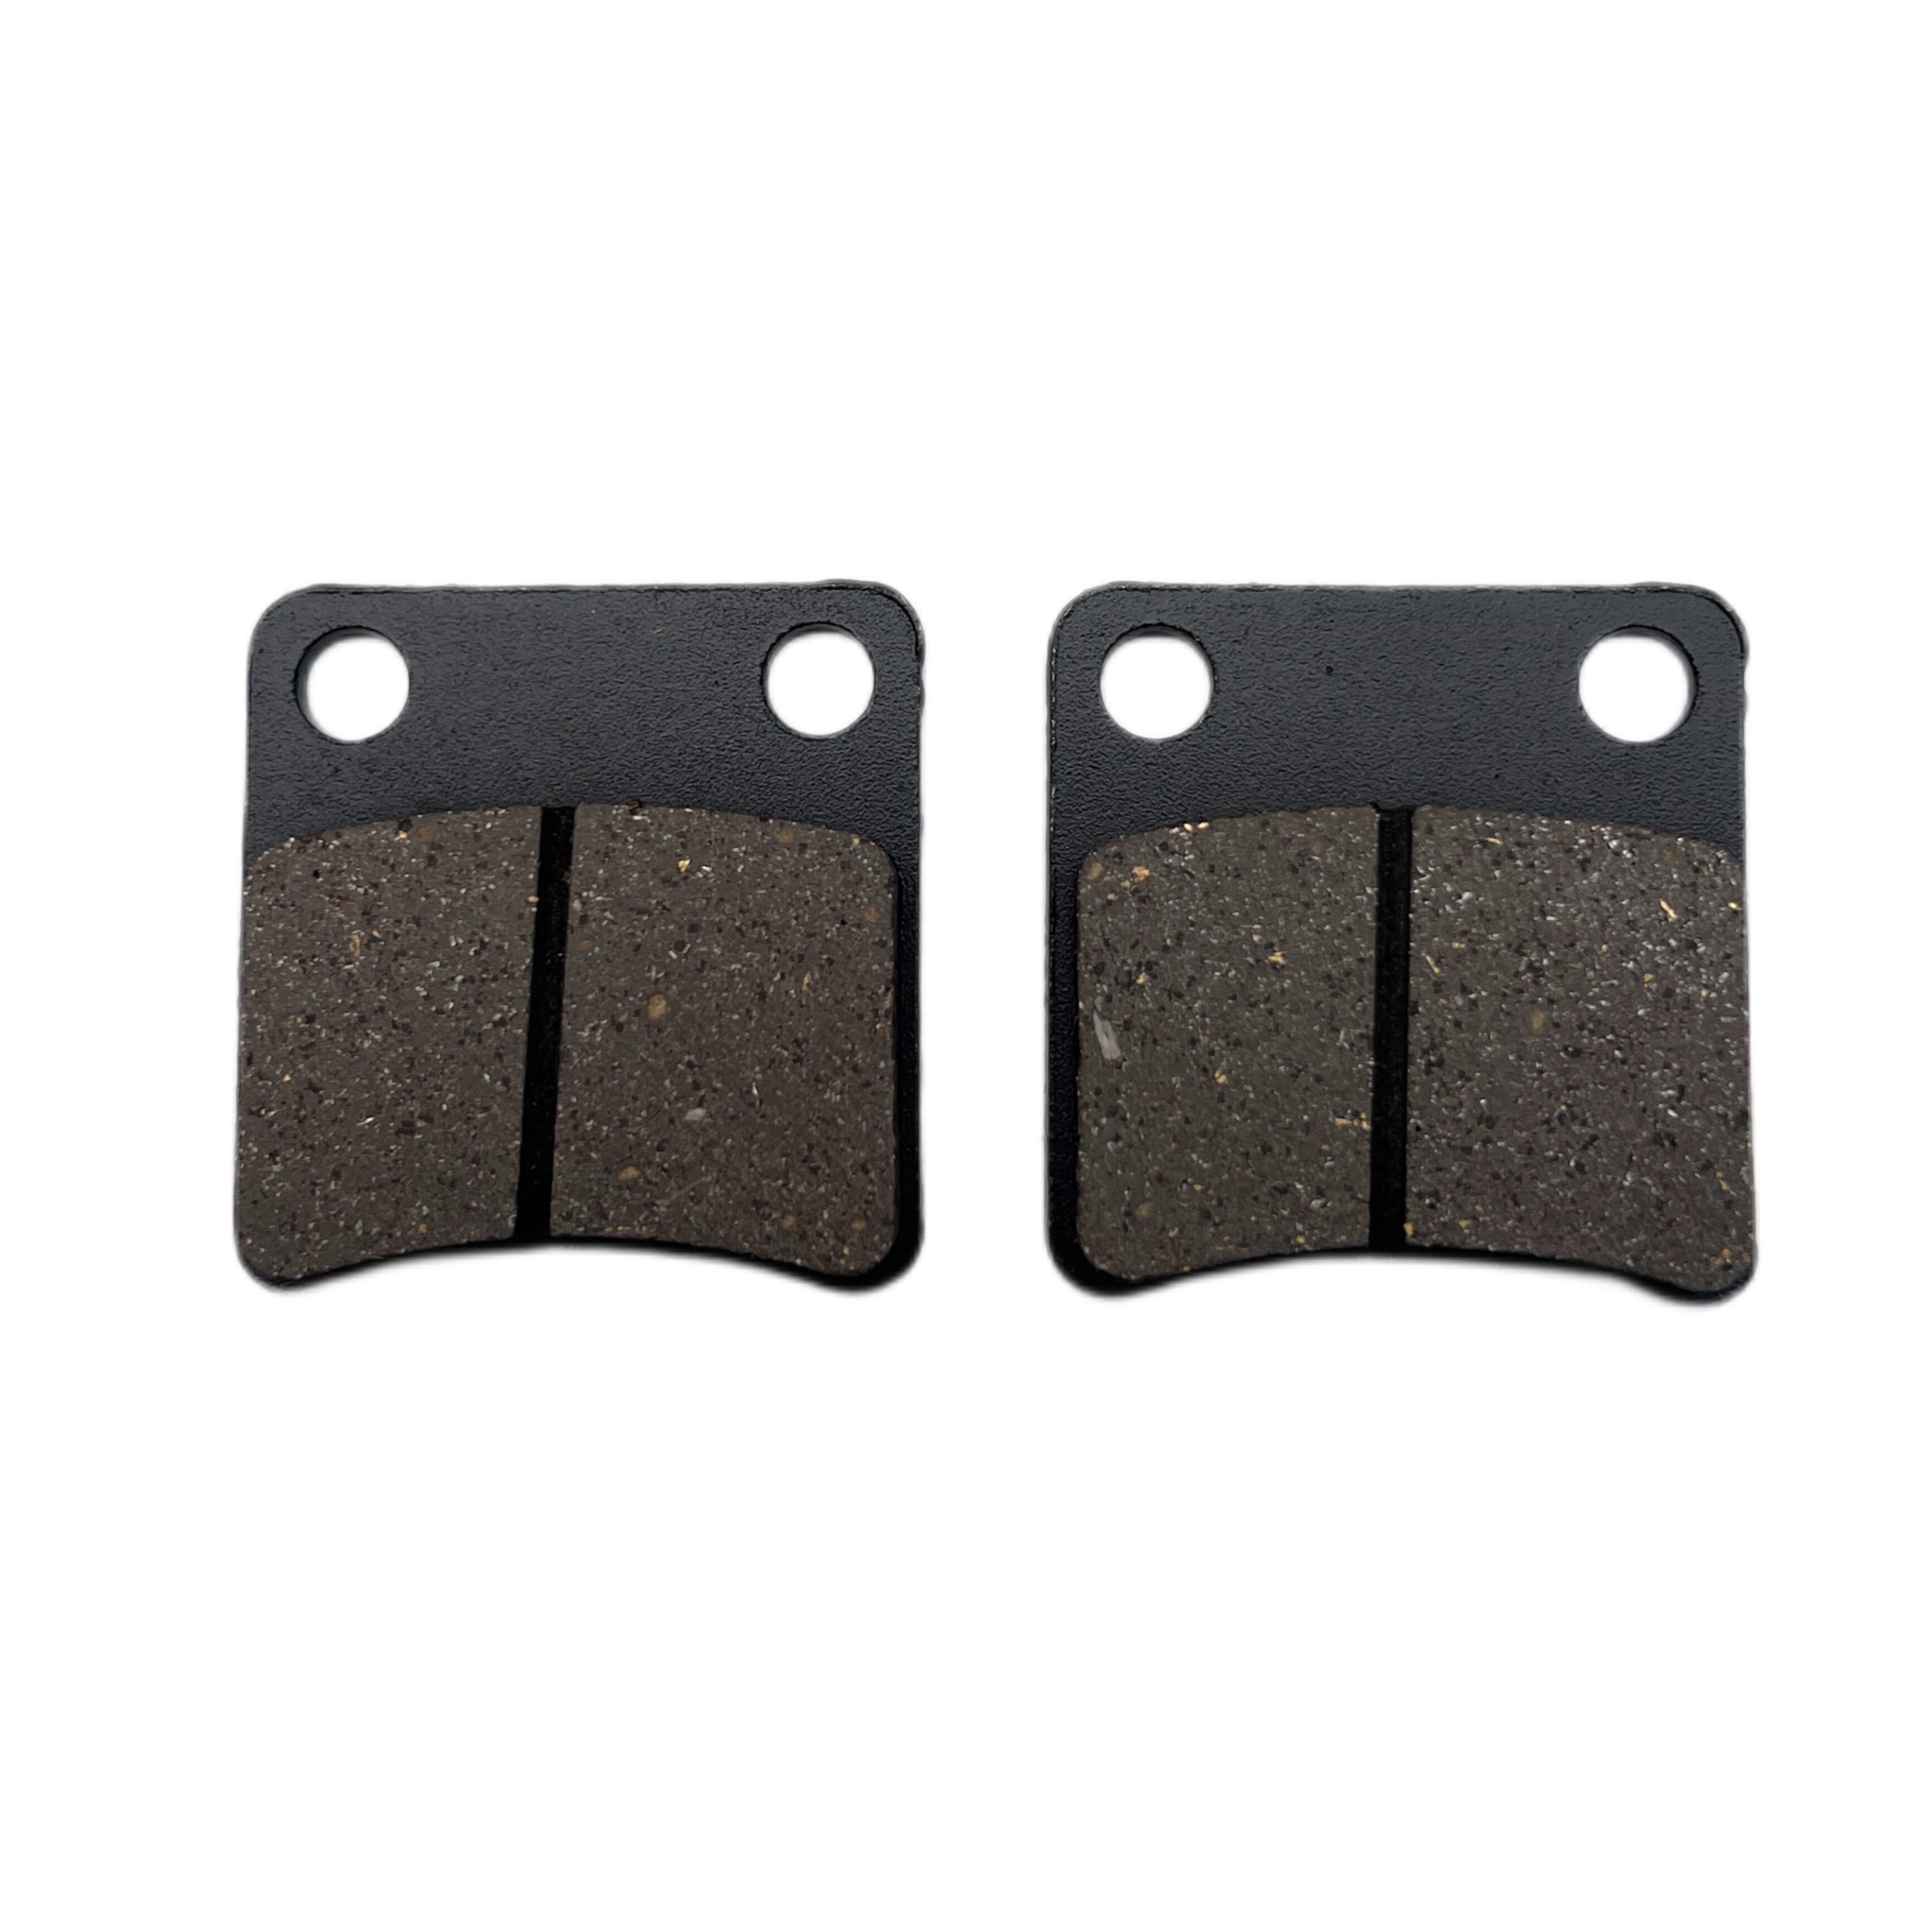 Brake Pads - GY6 125 Scooter